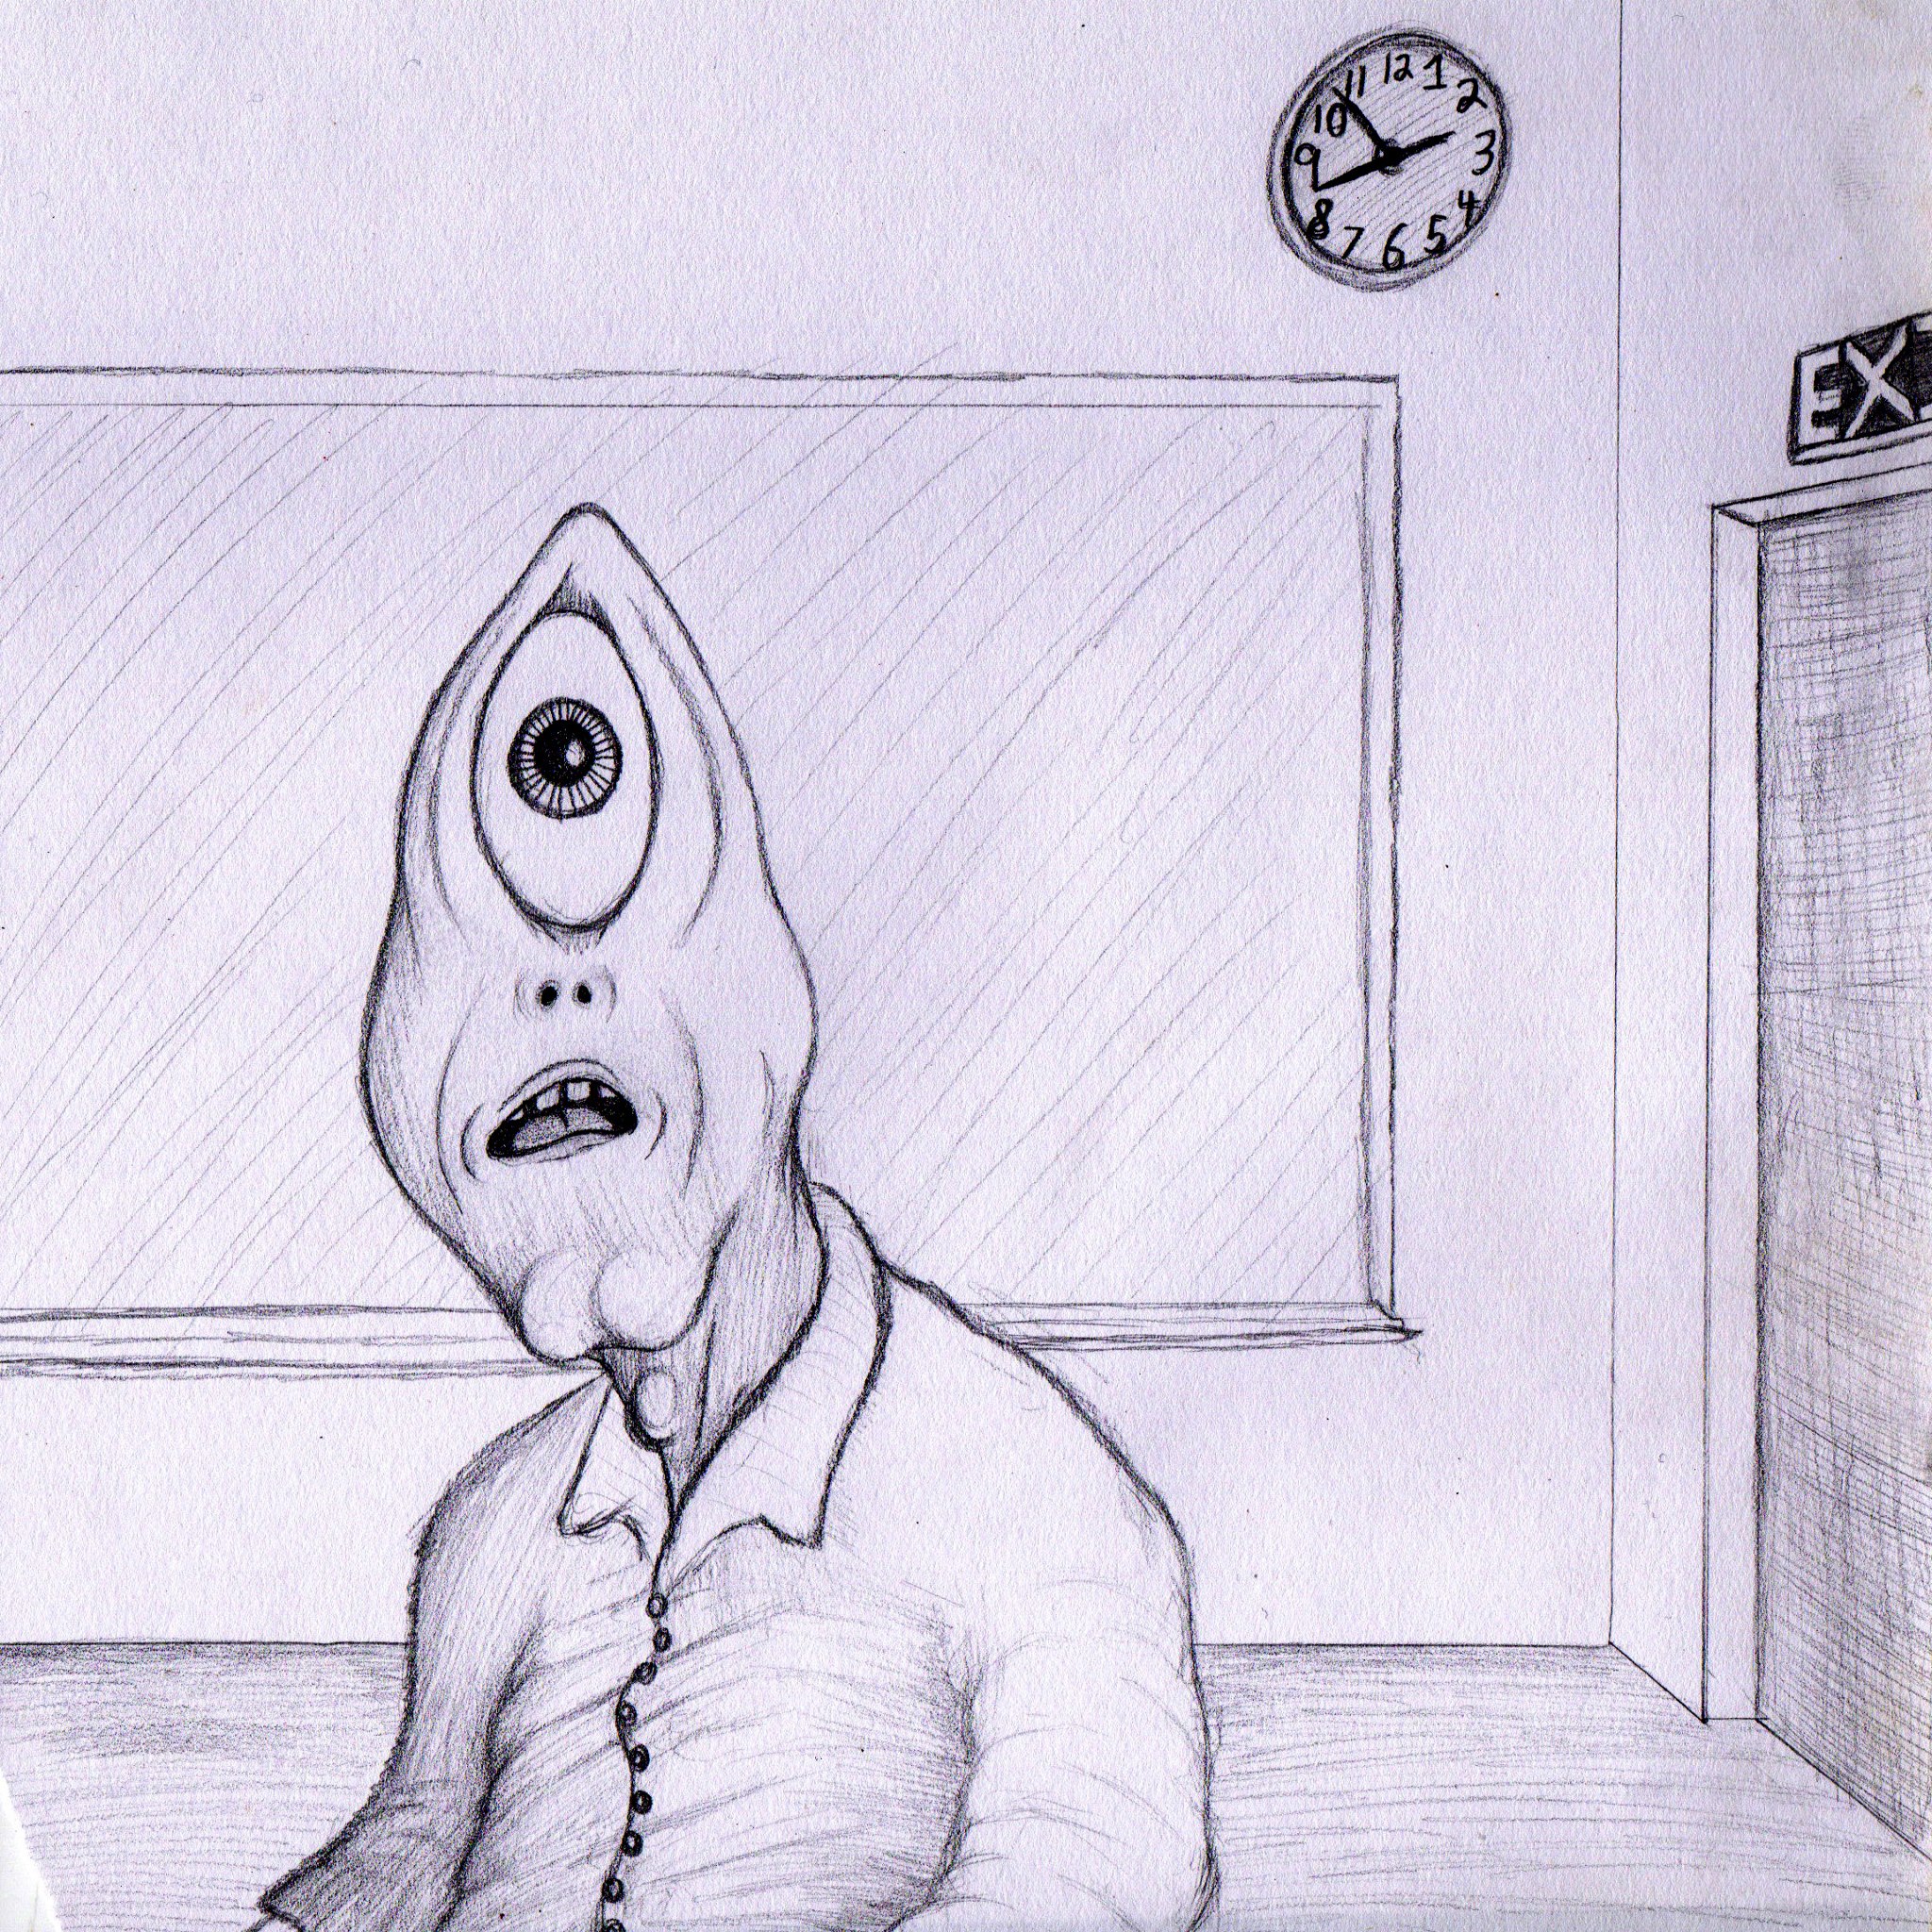 A cyclops alien, stares towards the view with a look of shock. He's in a room with a whiteboard in the background. To the side is a door with an "Exit" sign above it.